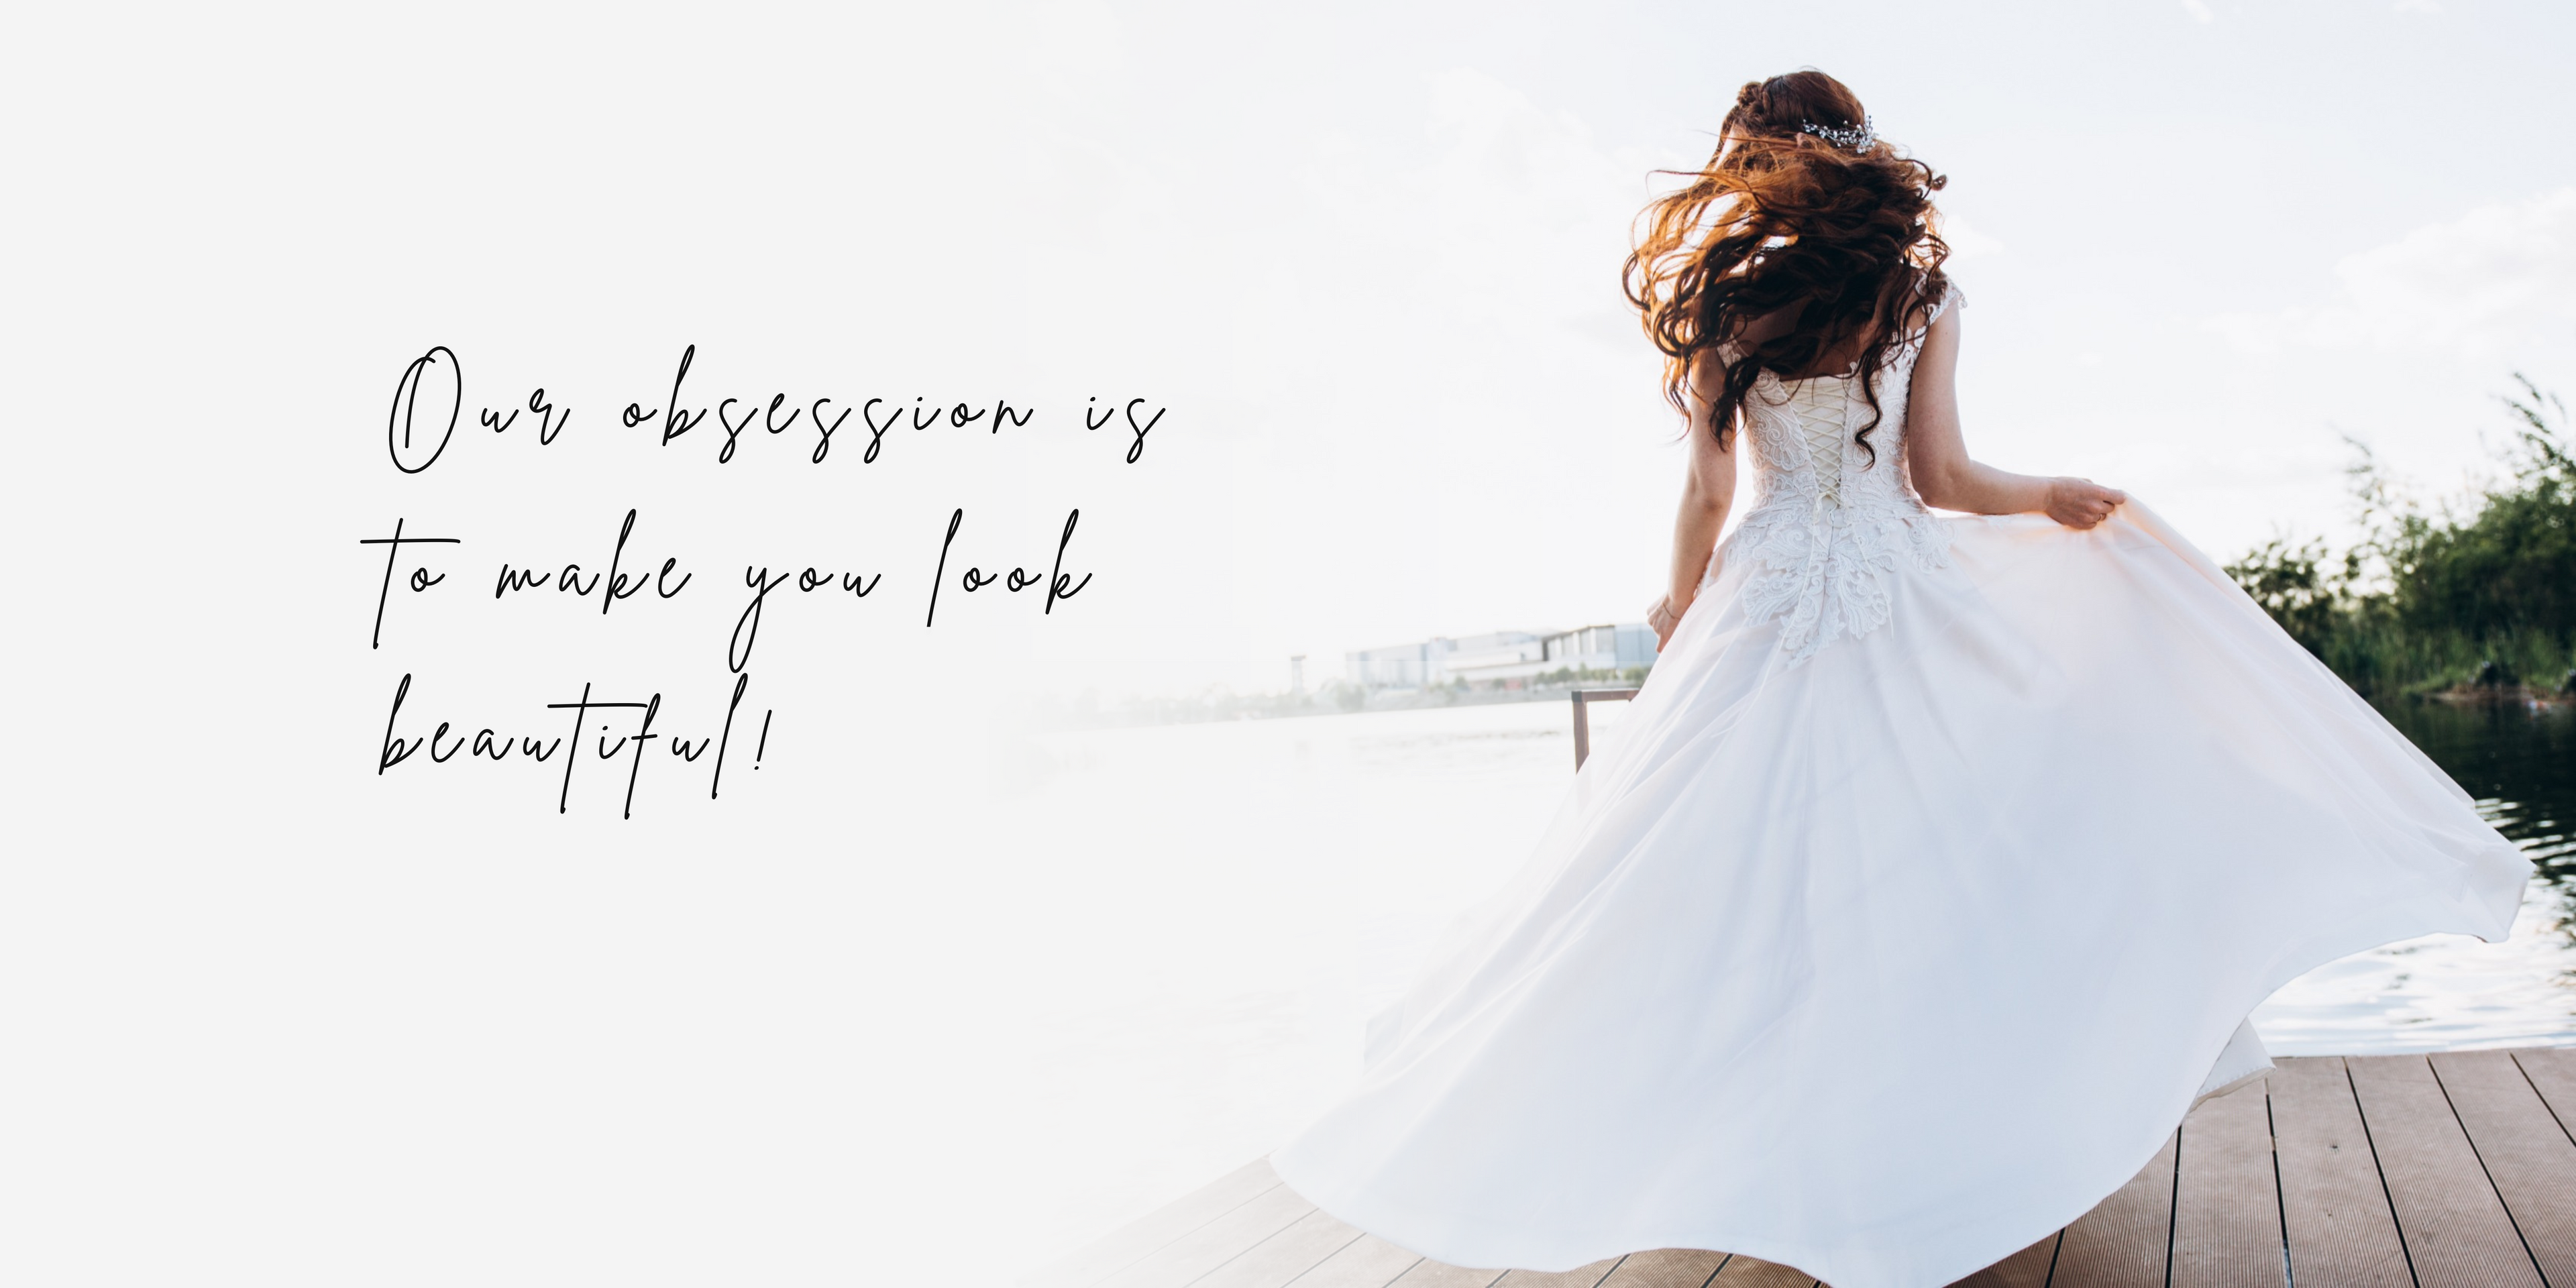 At Alekhya's Bridal, our obsession is to make you look beautiful!